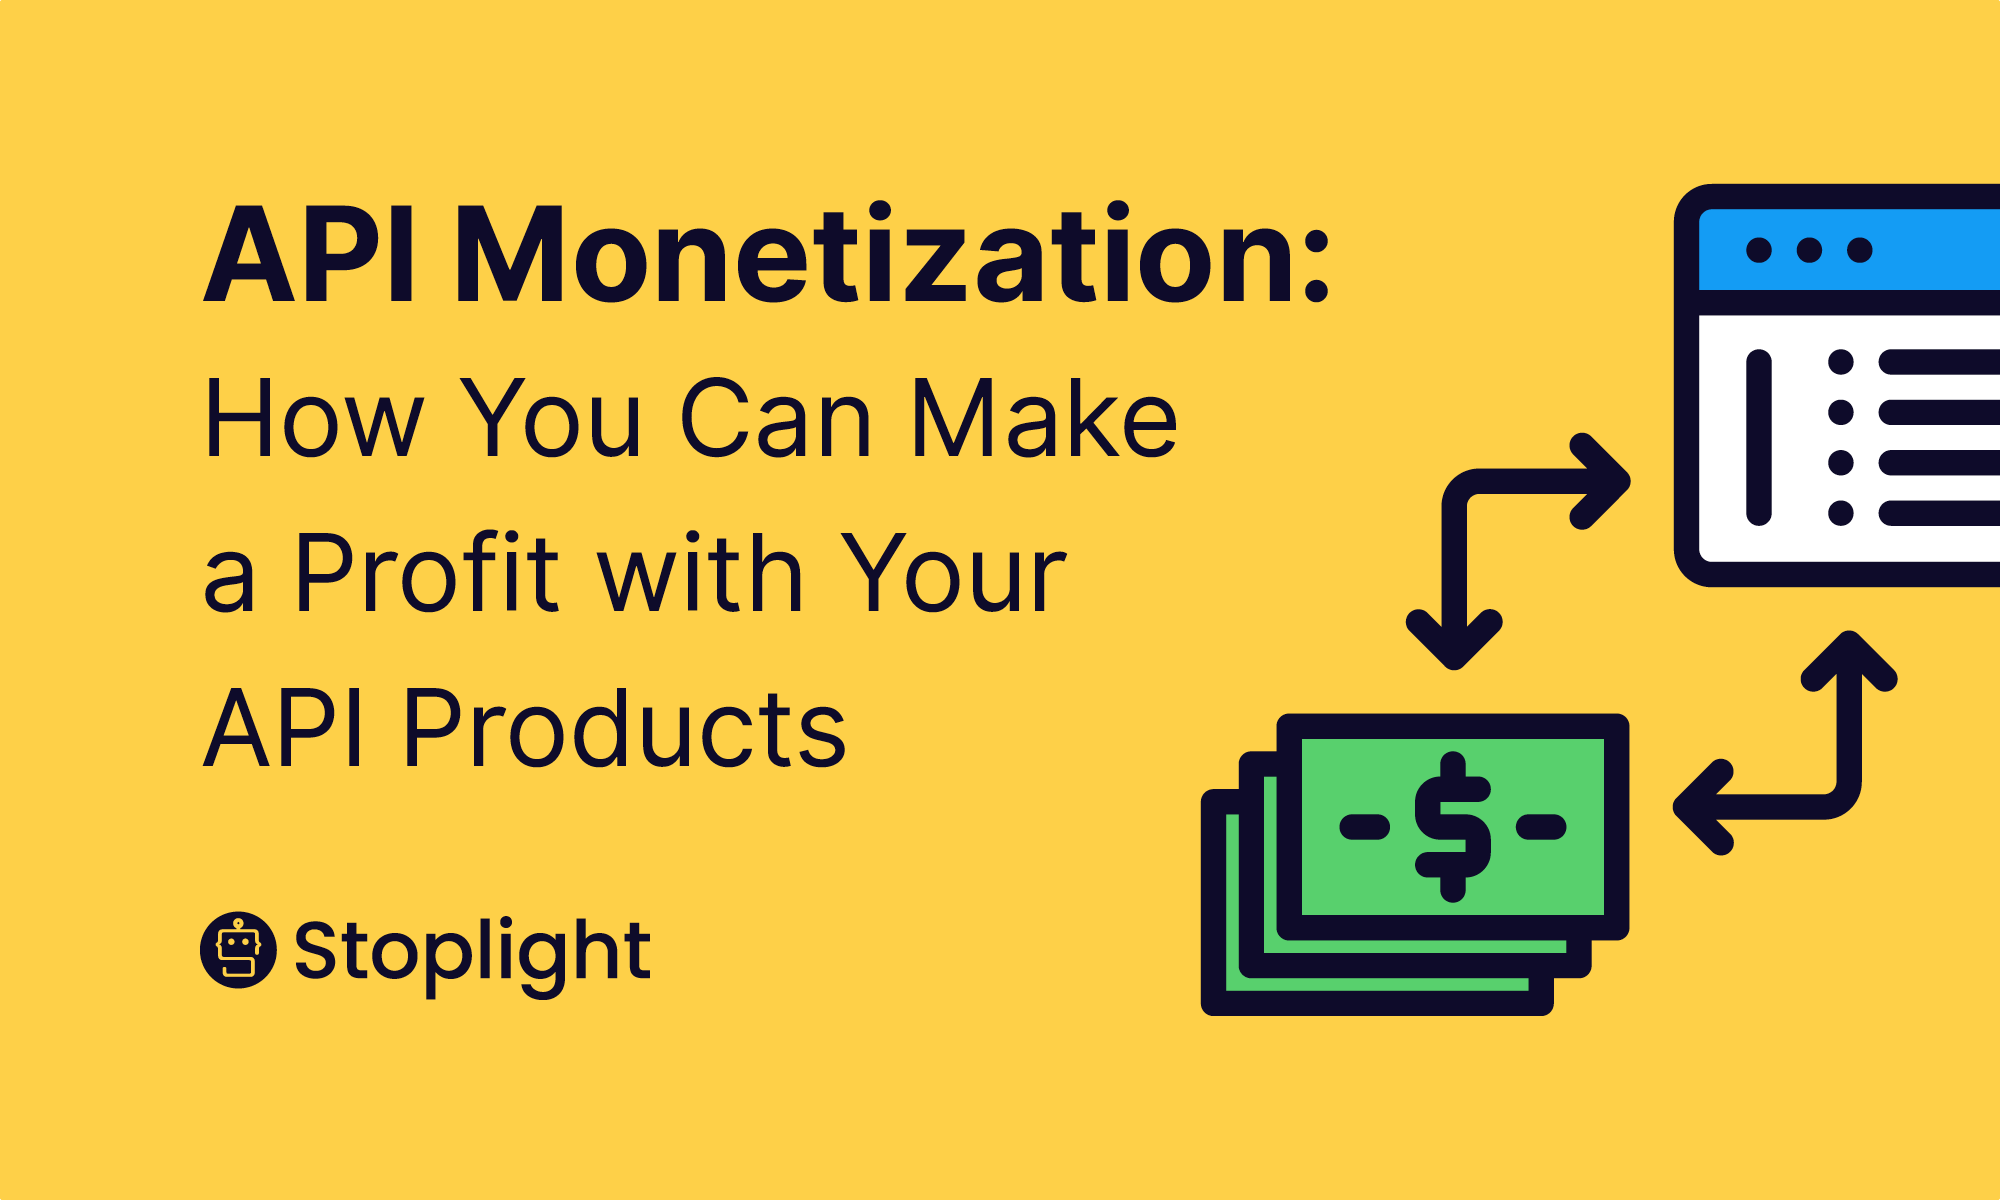 API Monetization: How You Can Make a Profit With API Products